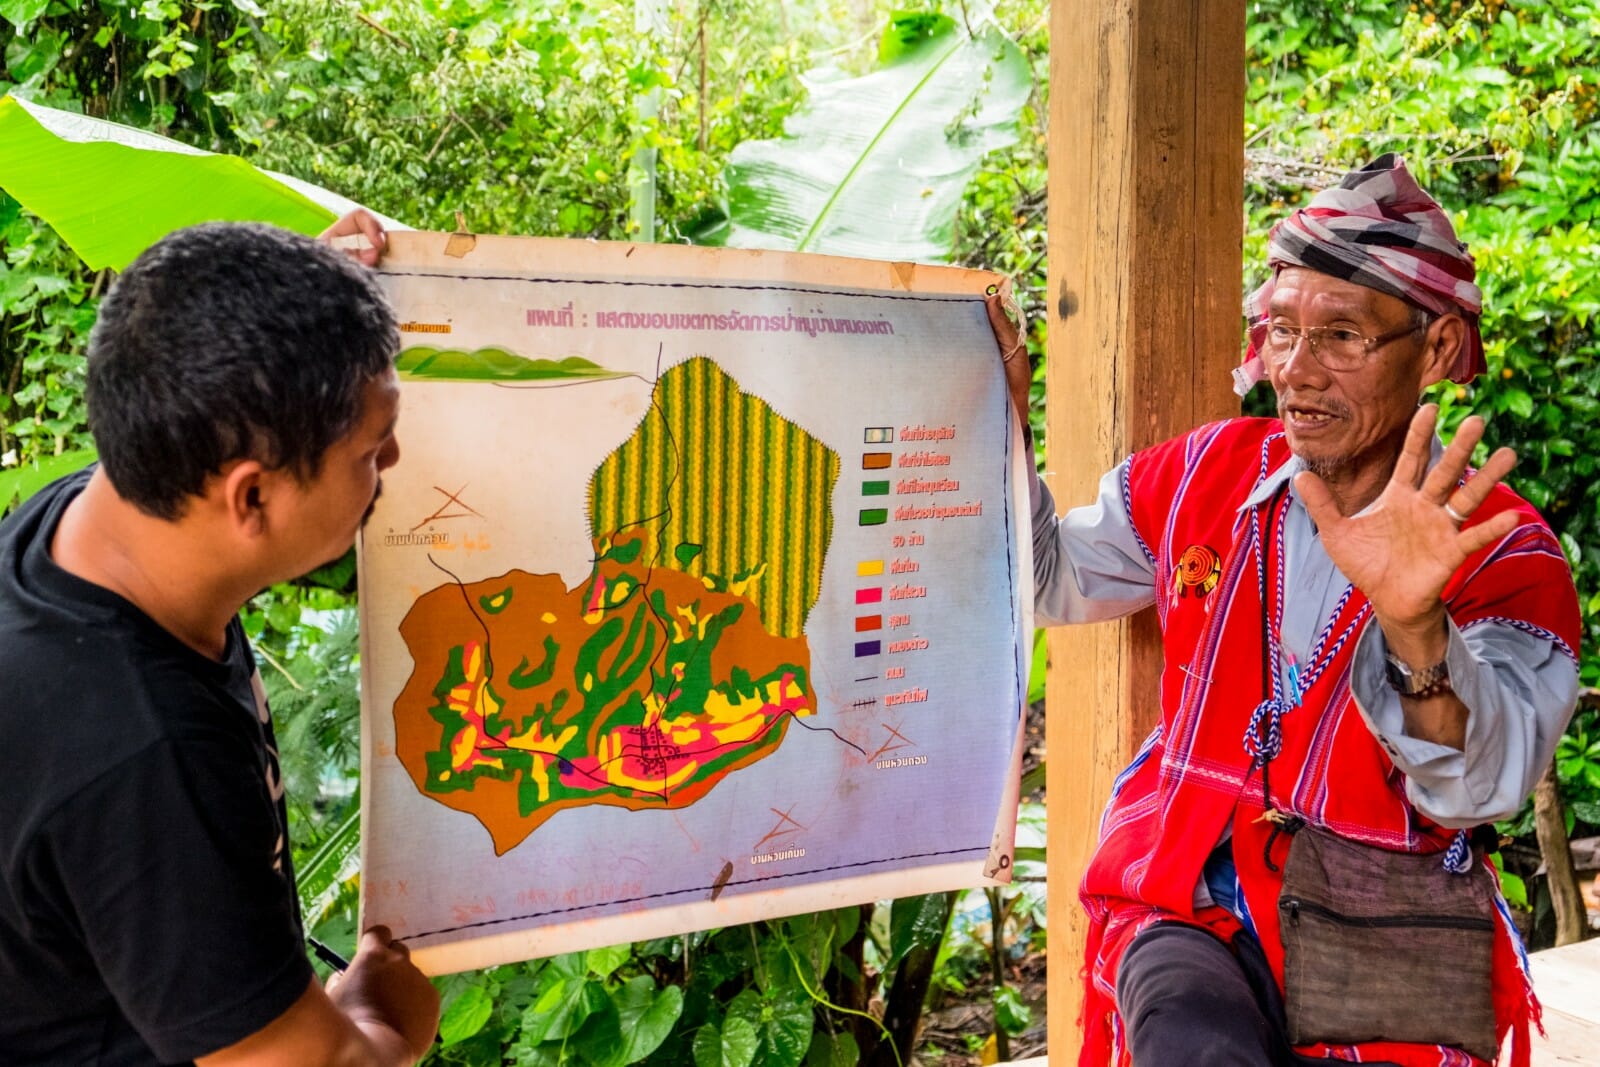 As Thailand works to mitigate carbon emissions, new forest conservation and land laws threaten to push the Ban Nong Tao communities off of their land.